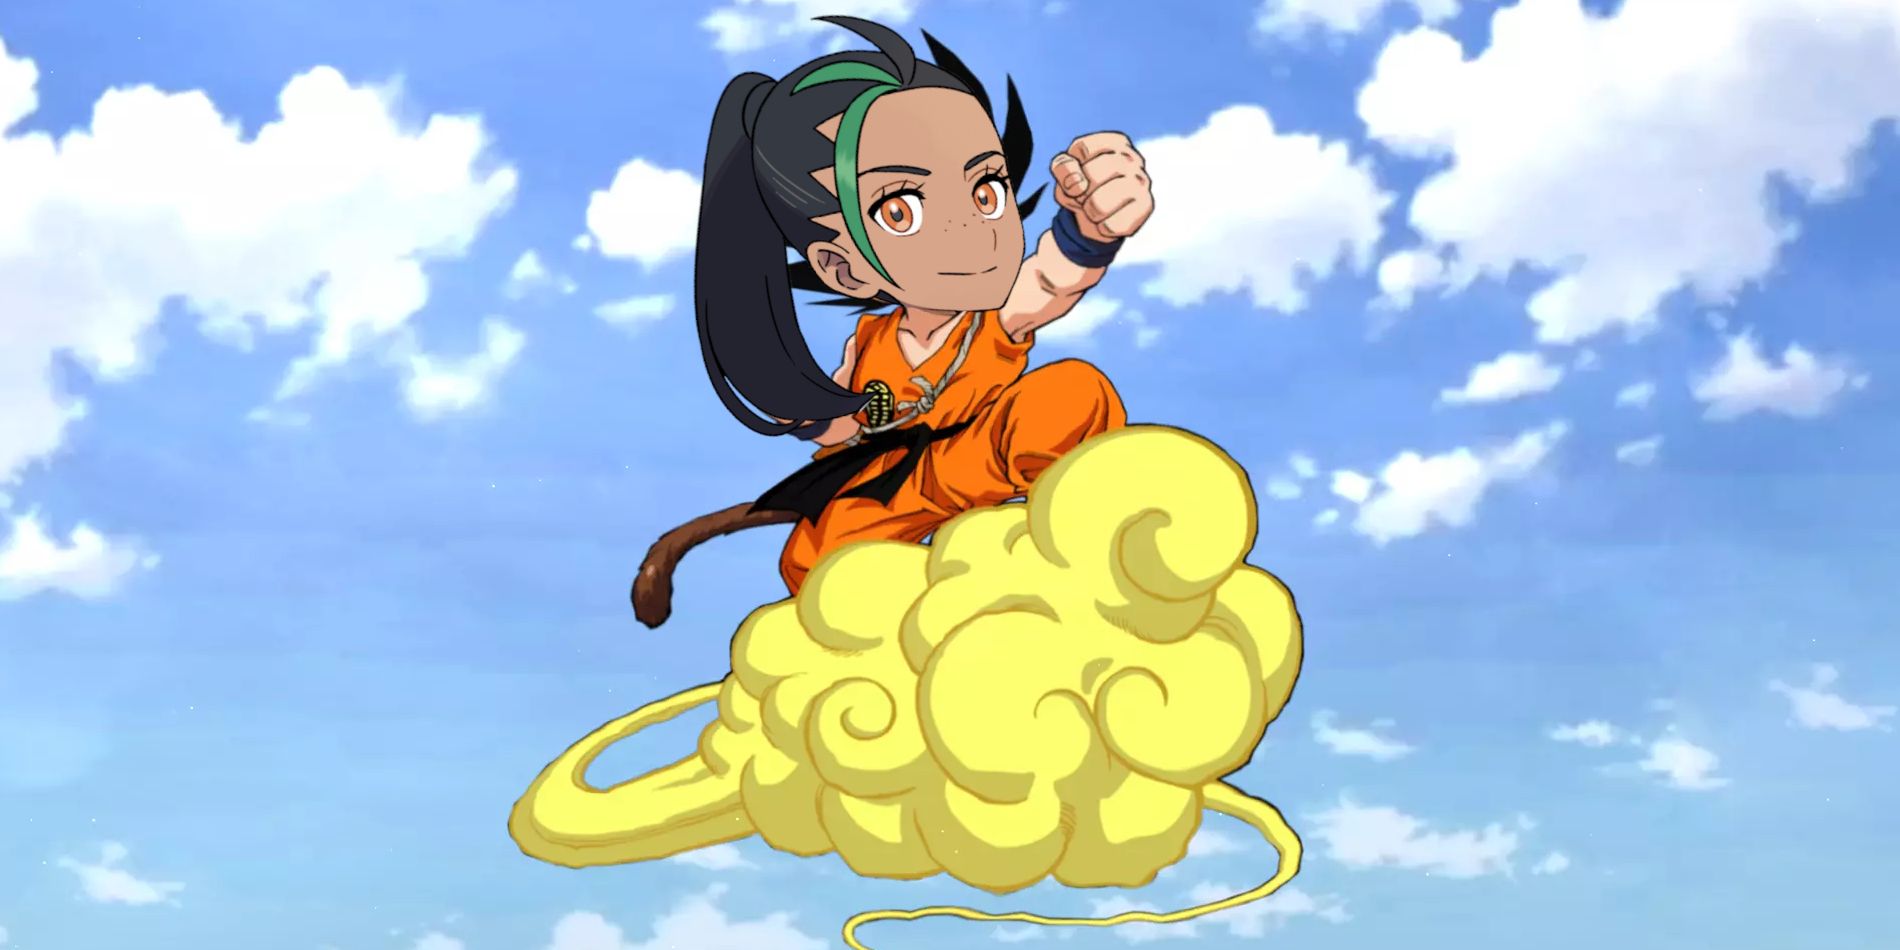 Pokemon rival Nemona's face is posted over young Goku's body as he rides his golden nimbus cloud in the sky.